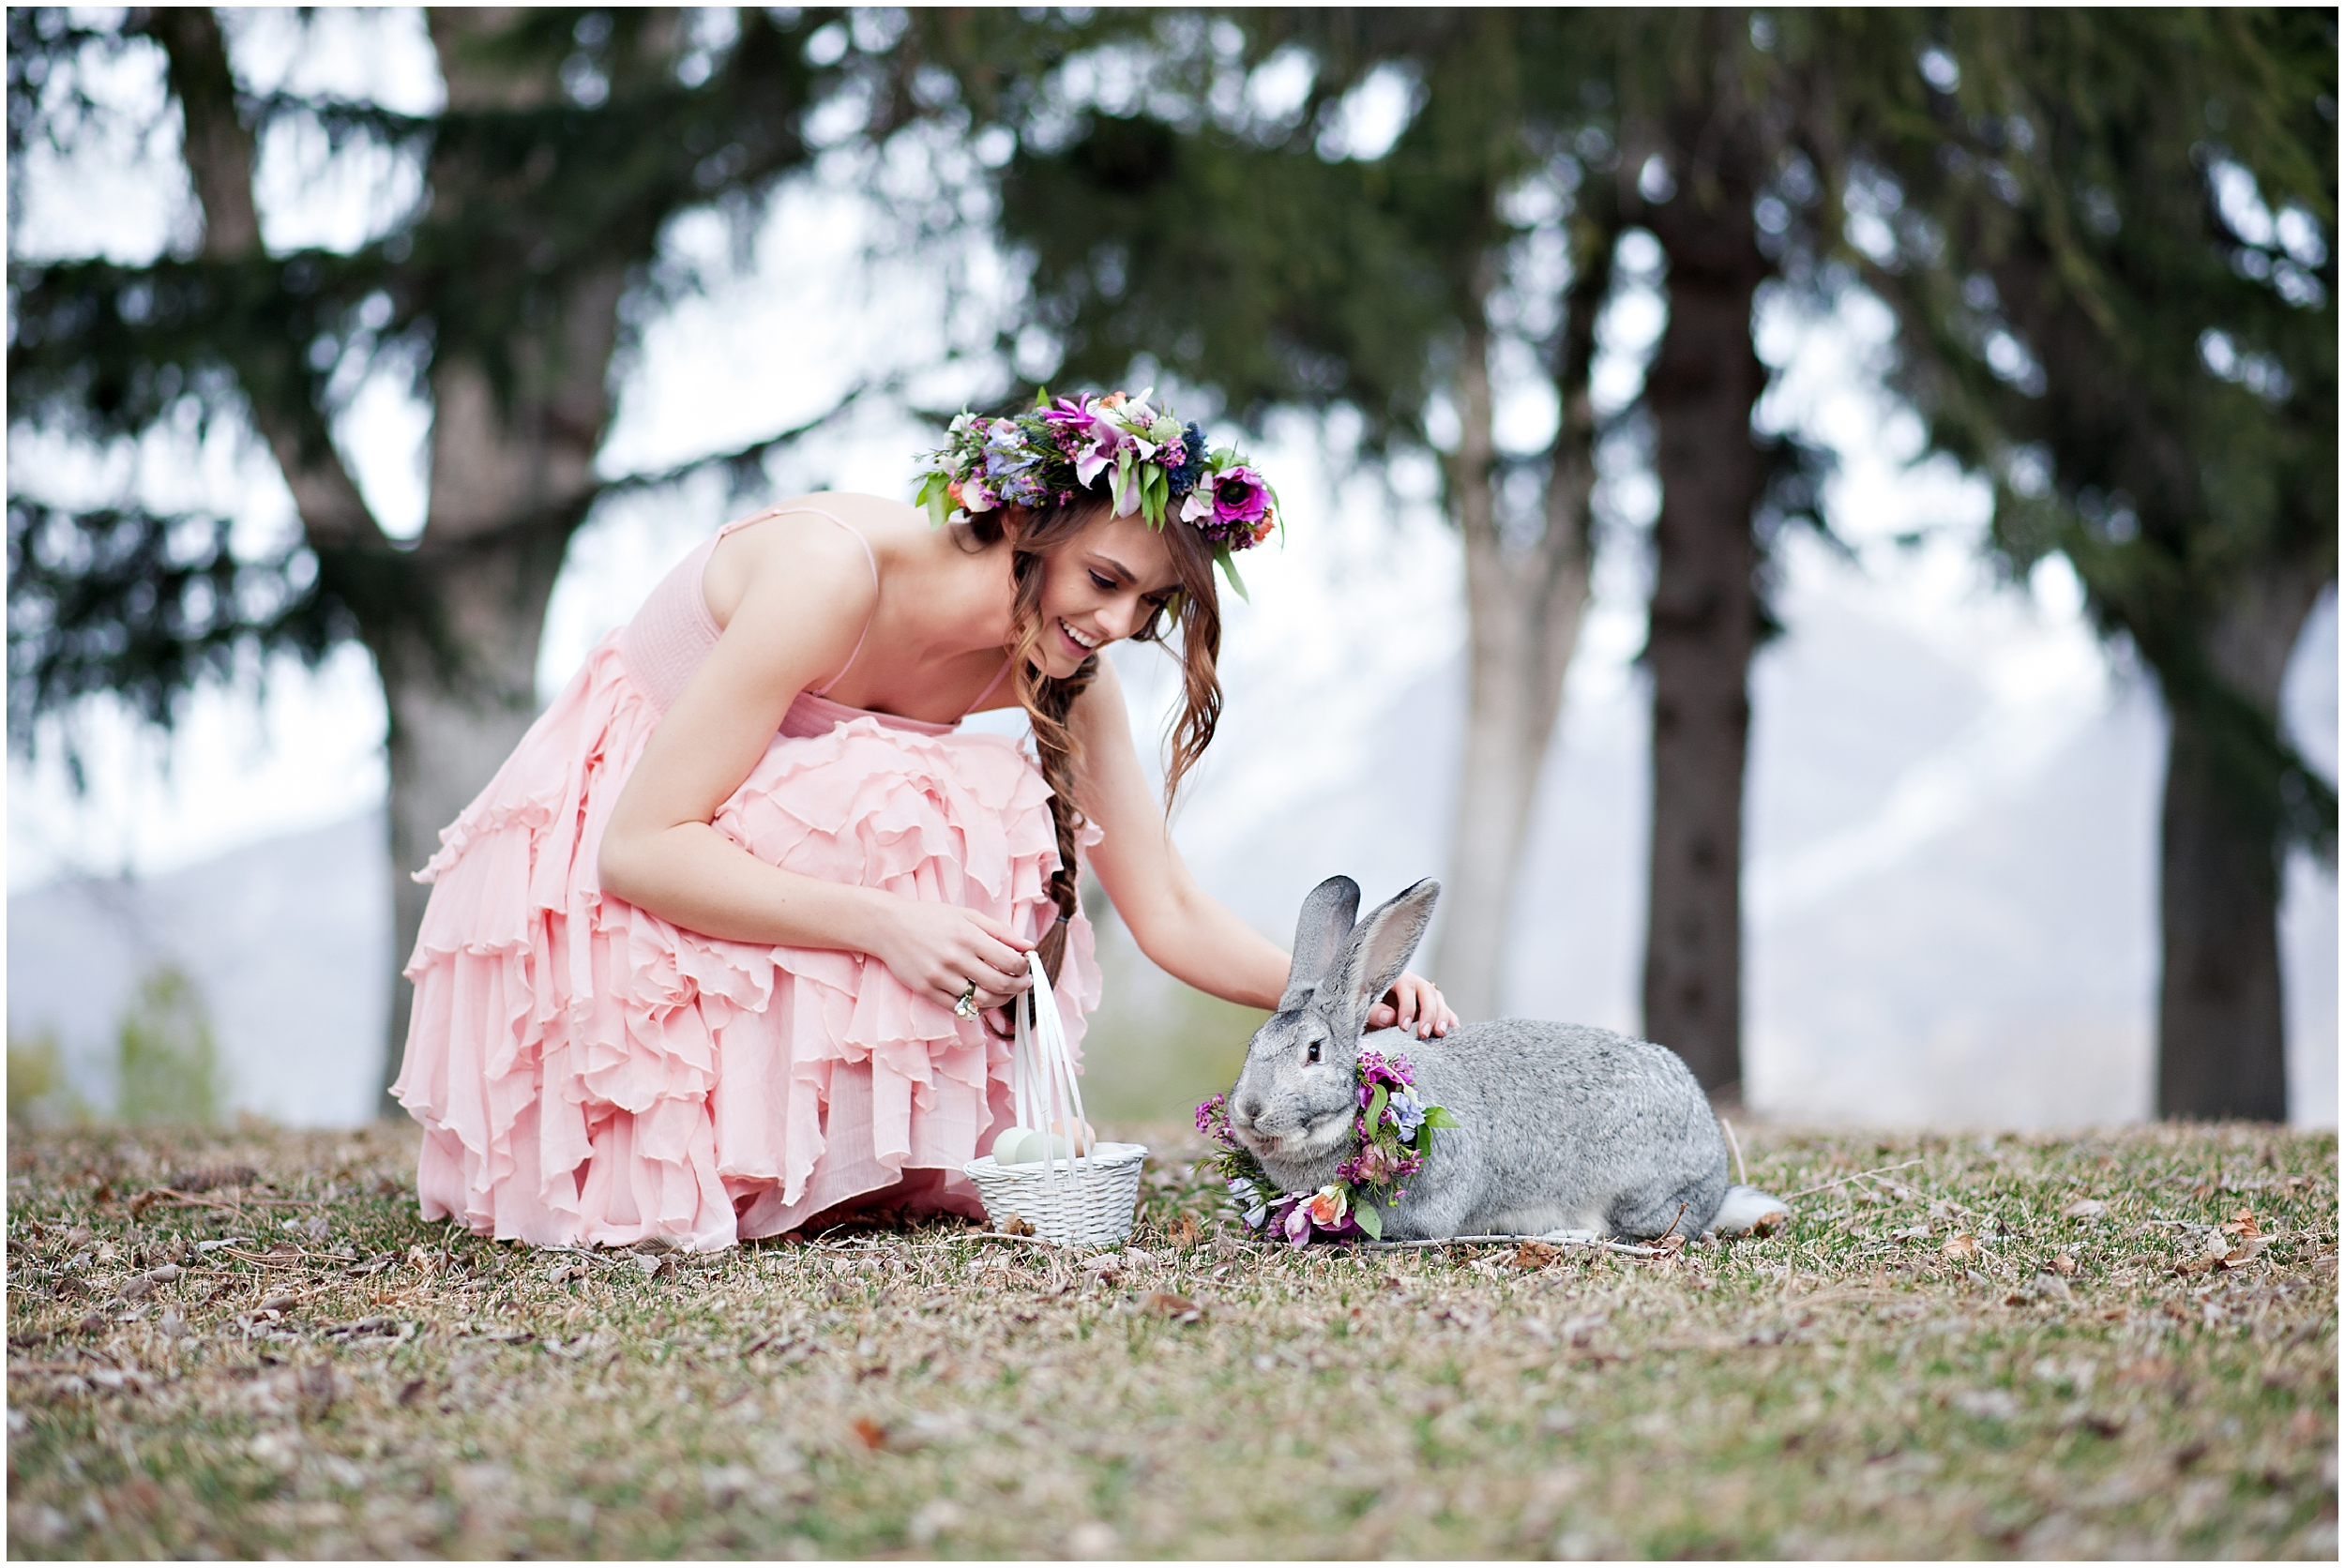 Spring bridal, bunny halo, floral halo, spring blooms, Calie rose flowers, whimsical bridals, Easter bunny, Utah wedding photographers, Utah wedding photographer, Utah wedding photography, Utah county wedding photography, Utah county wedding photographer, salt lake city photographers, salt lake city wedding photography, salt lake photographers, salt lake city photographers, photographers in Utah, Utah photography, photography Utah, photographer Utah, Kristina Curtis photography, Kristina Curtis Photographer, www.kristinacurtisphotography.com